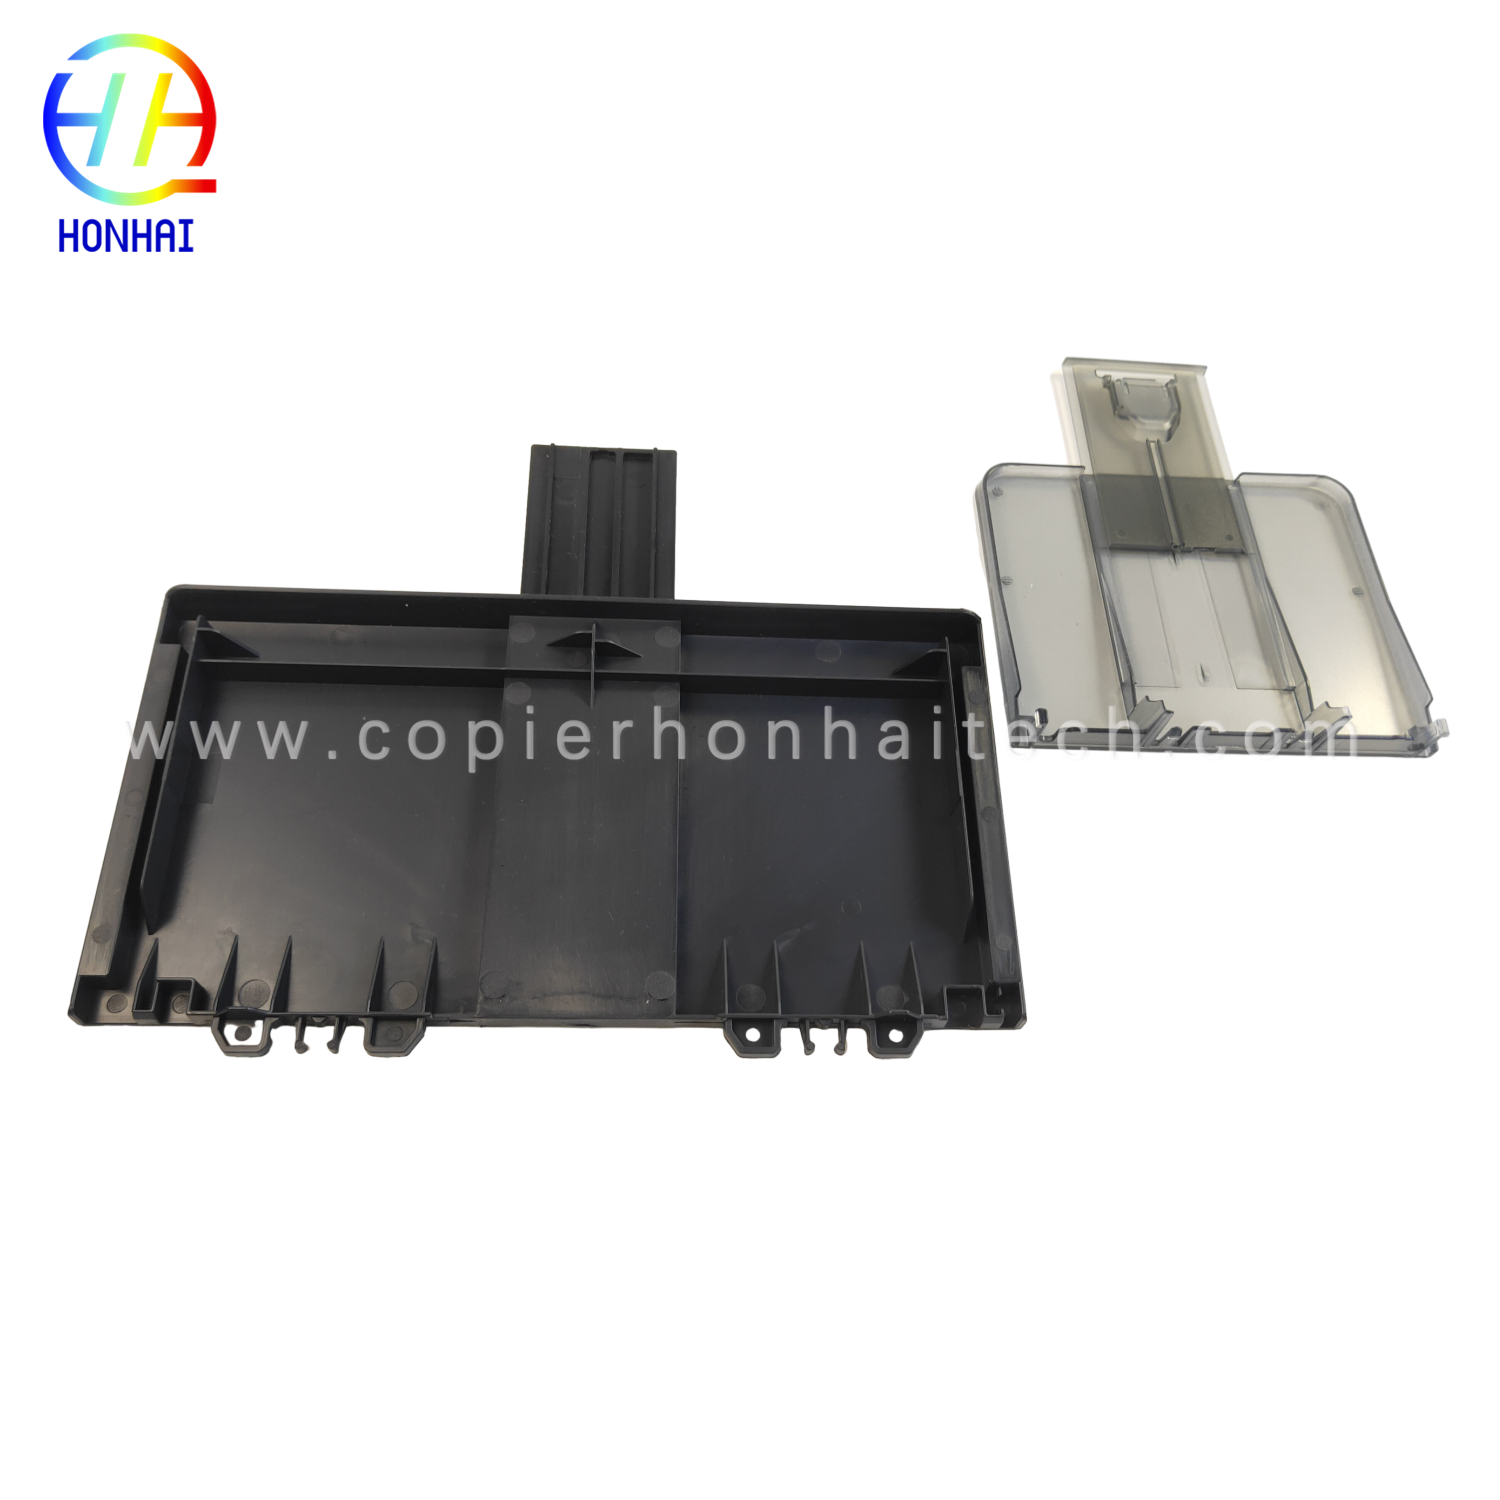 https://www.copierhonhaitech.com/receiver-tray-and-paper-tray-set-for-hp-laserjet-pro-mfp-225dn-product/